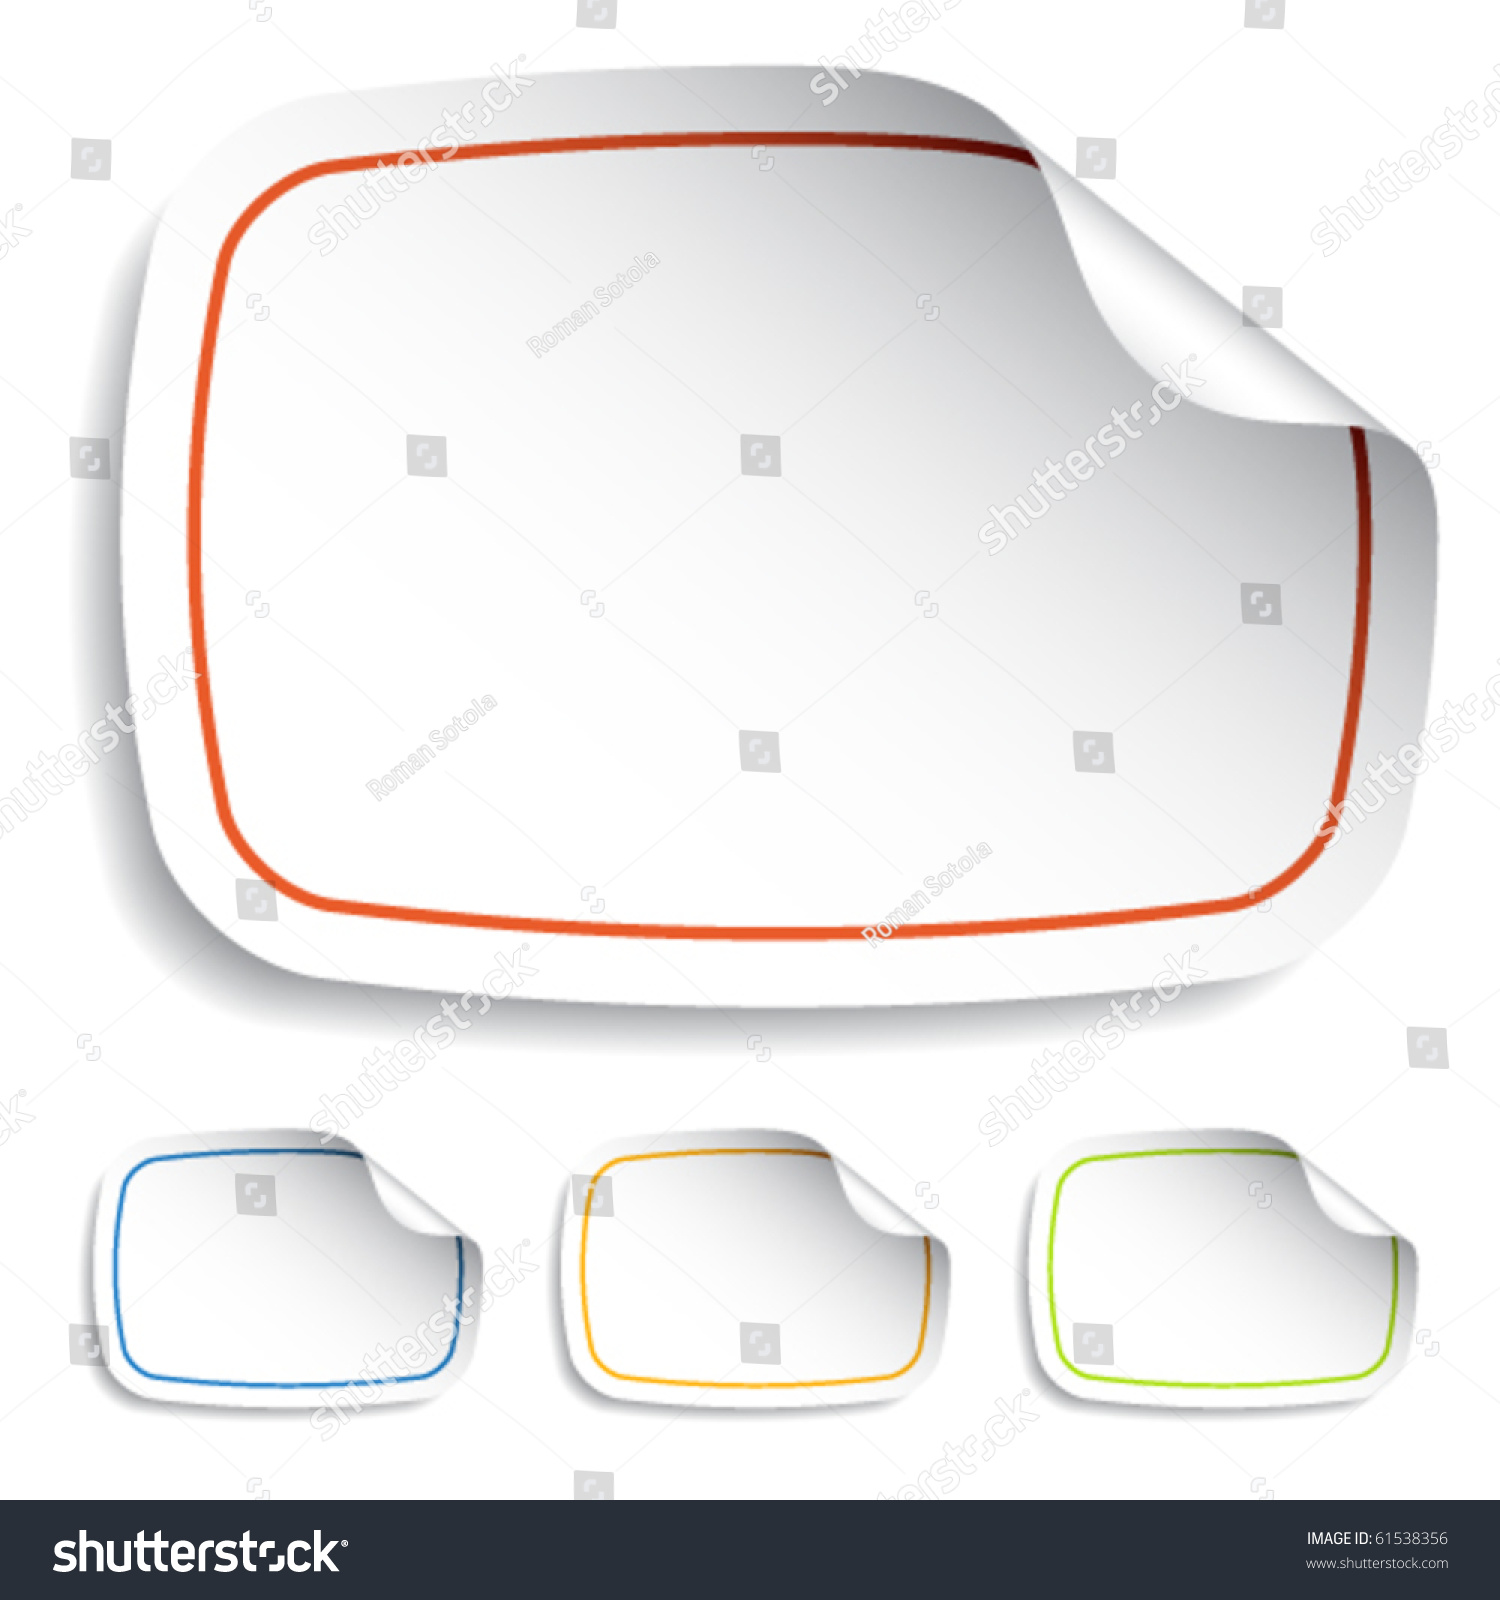 Vector Blank Stickers Stock Vector (Royalty Free) 61538356 - Shutterstock